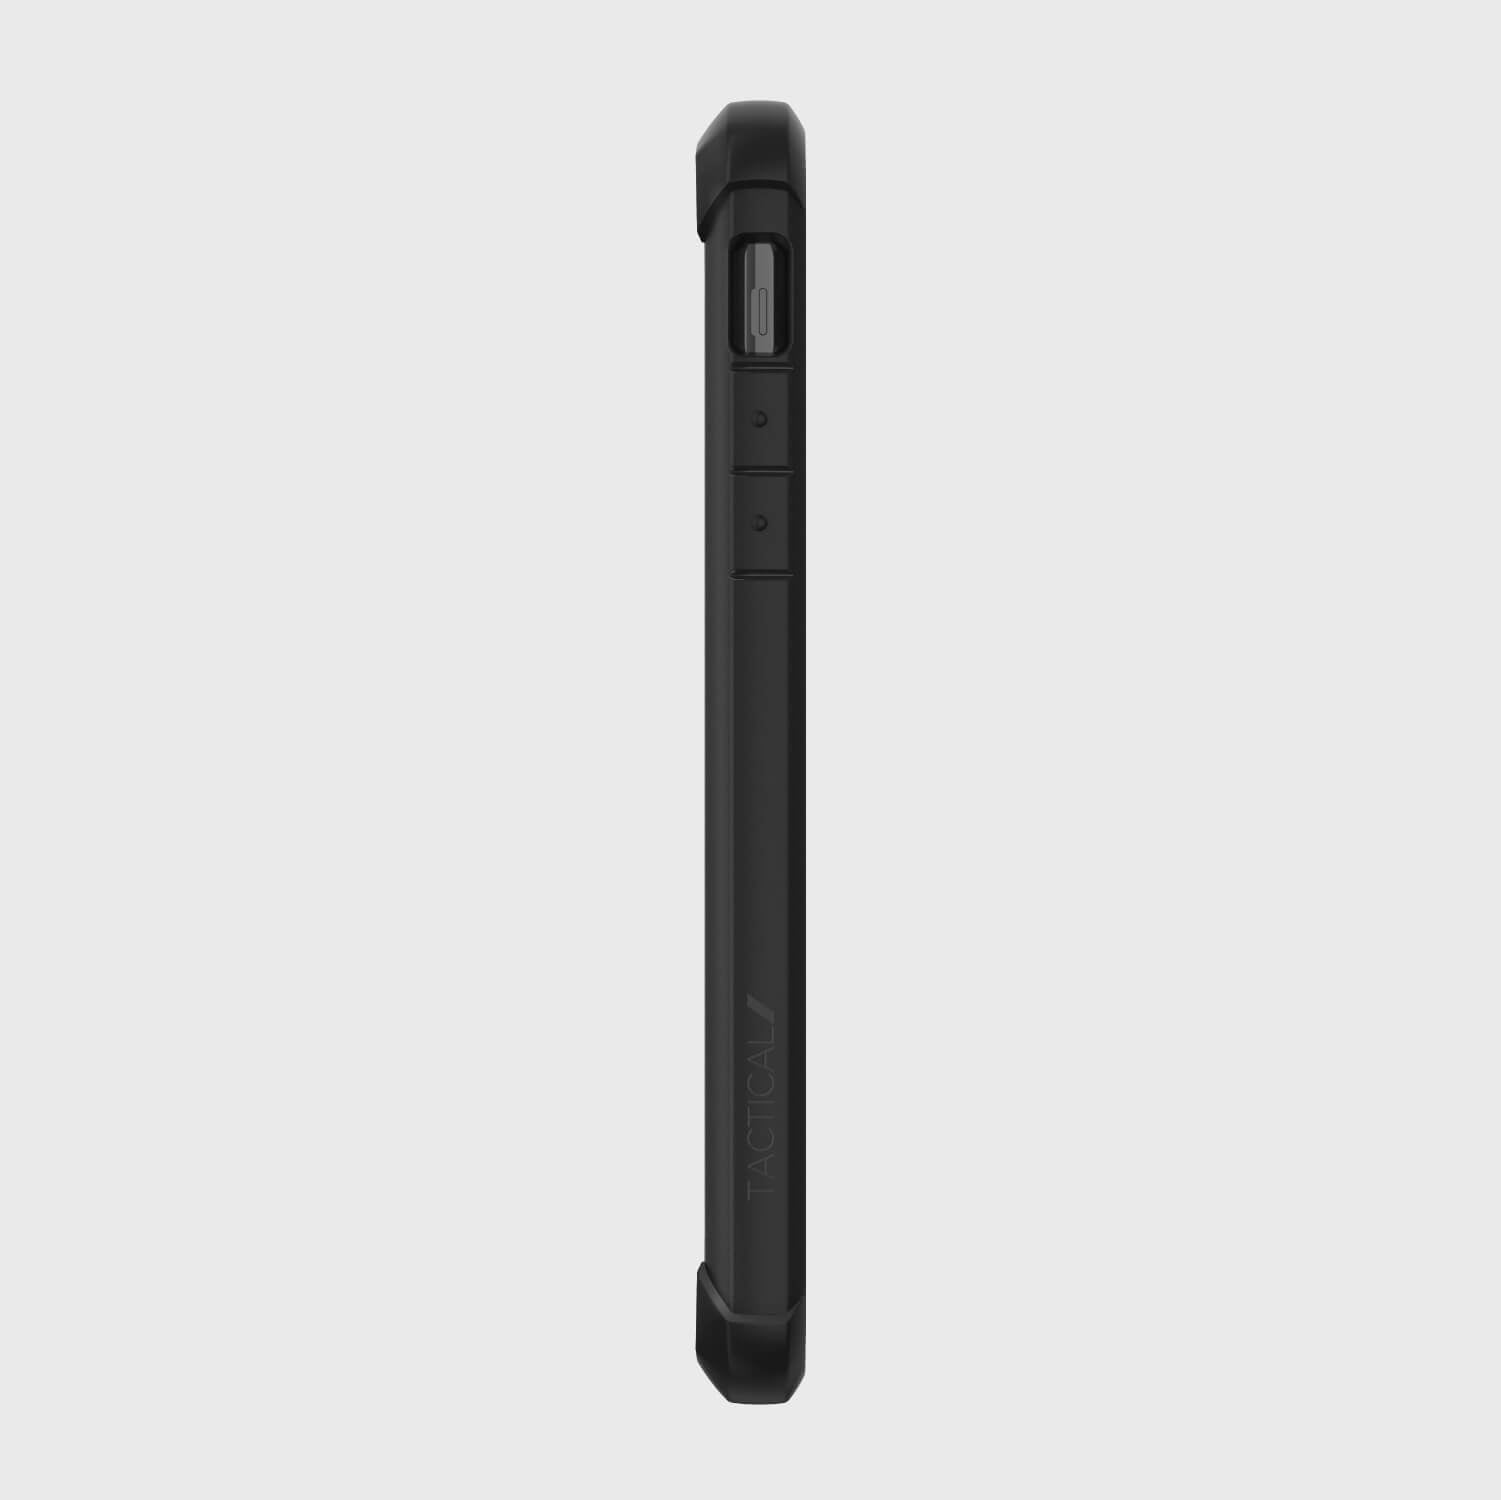 The iPhone 11 Pro Max Case - TACTICAL by Raptic is showcased from the back, highlighting its sleek black design against a clean white background. With a shock-absorbing rubber exterior, this case provides superior protection.